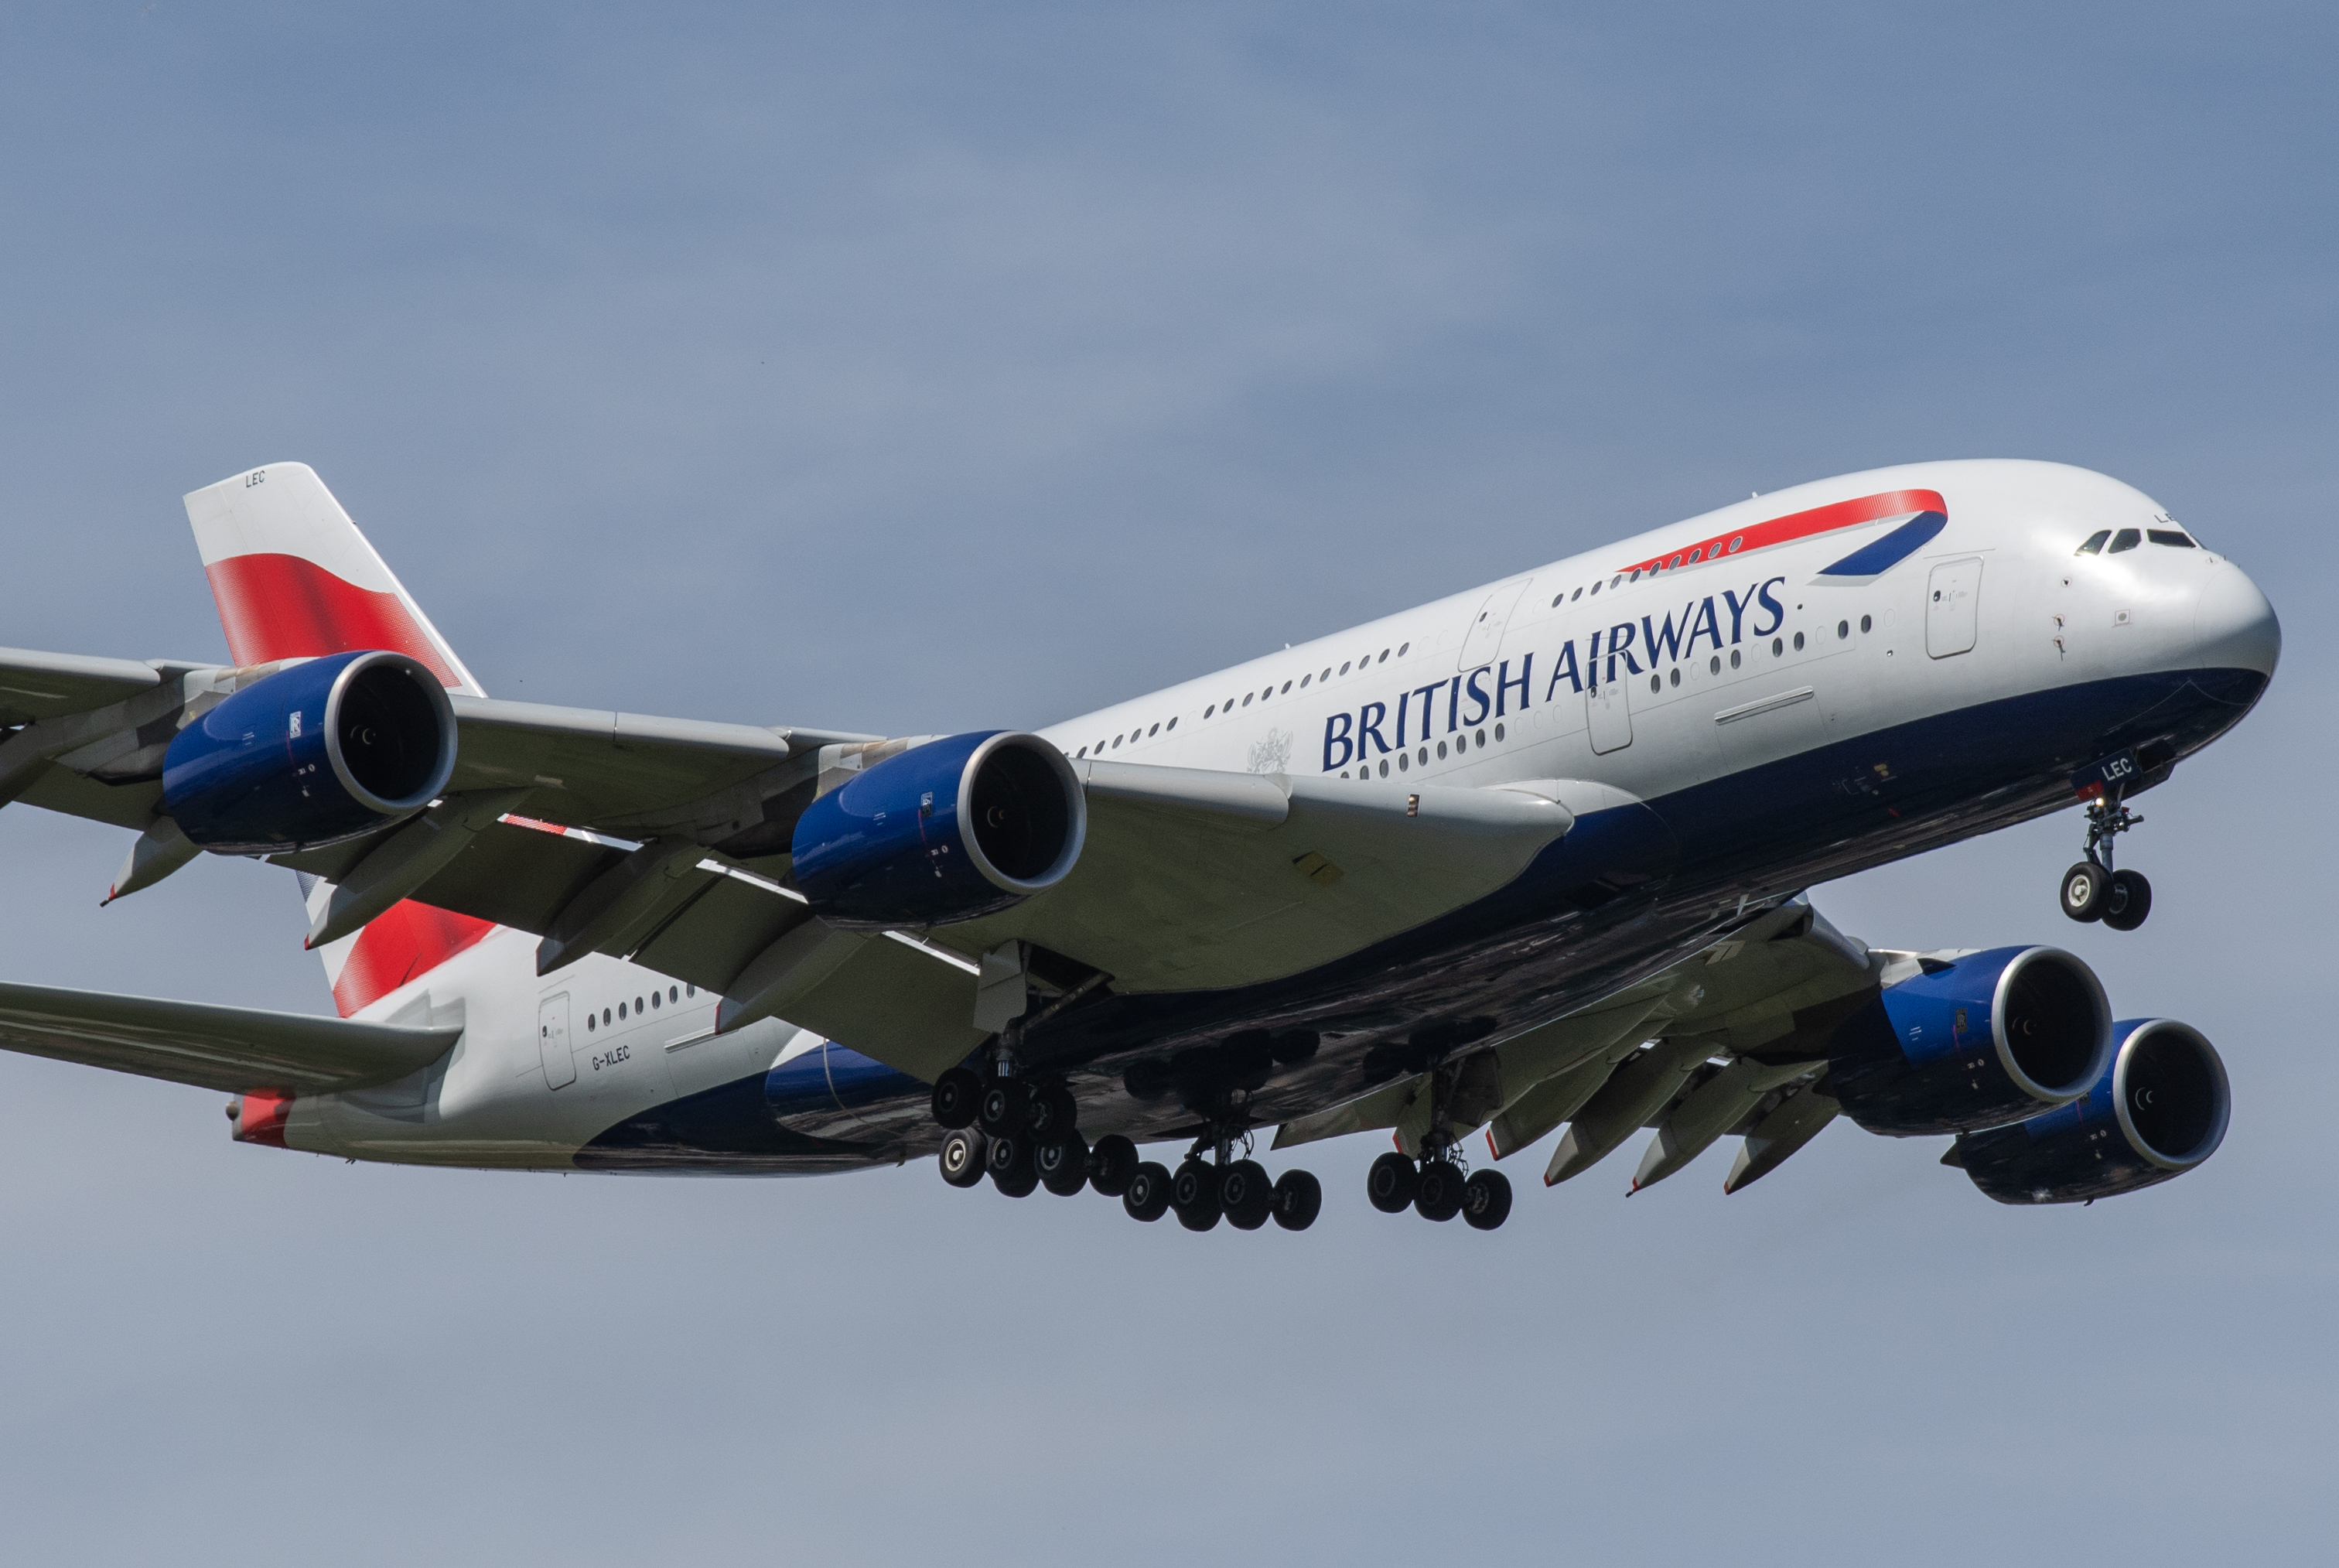 G-XLEC/GXLEC British Airways Airbus A380 Airframe Information - AVSpotters.com